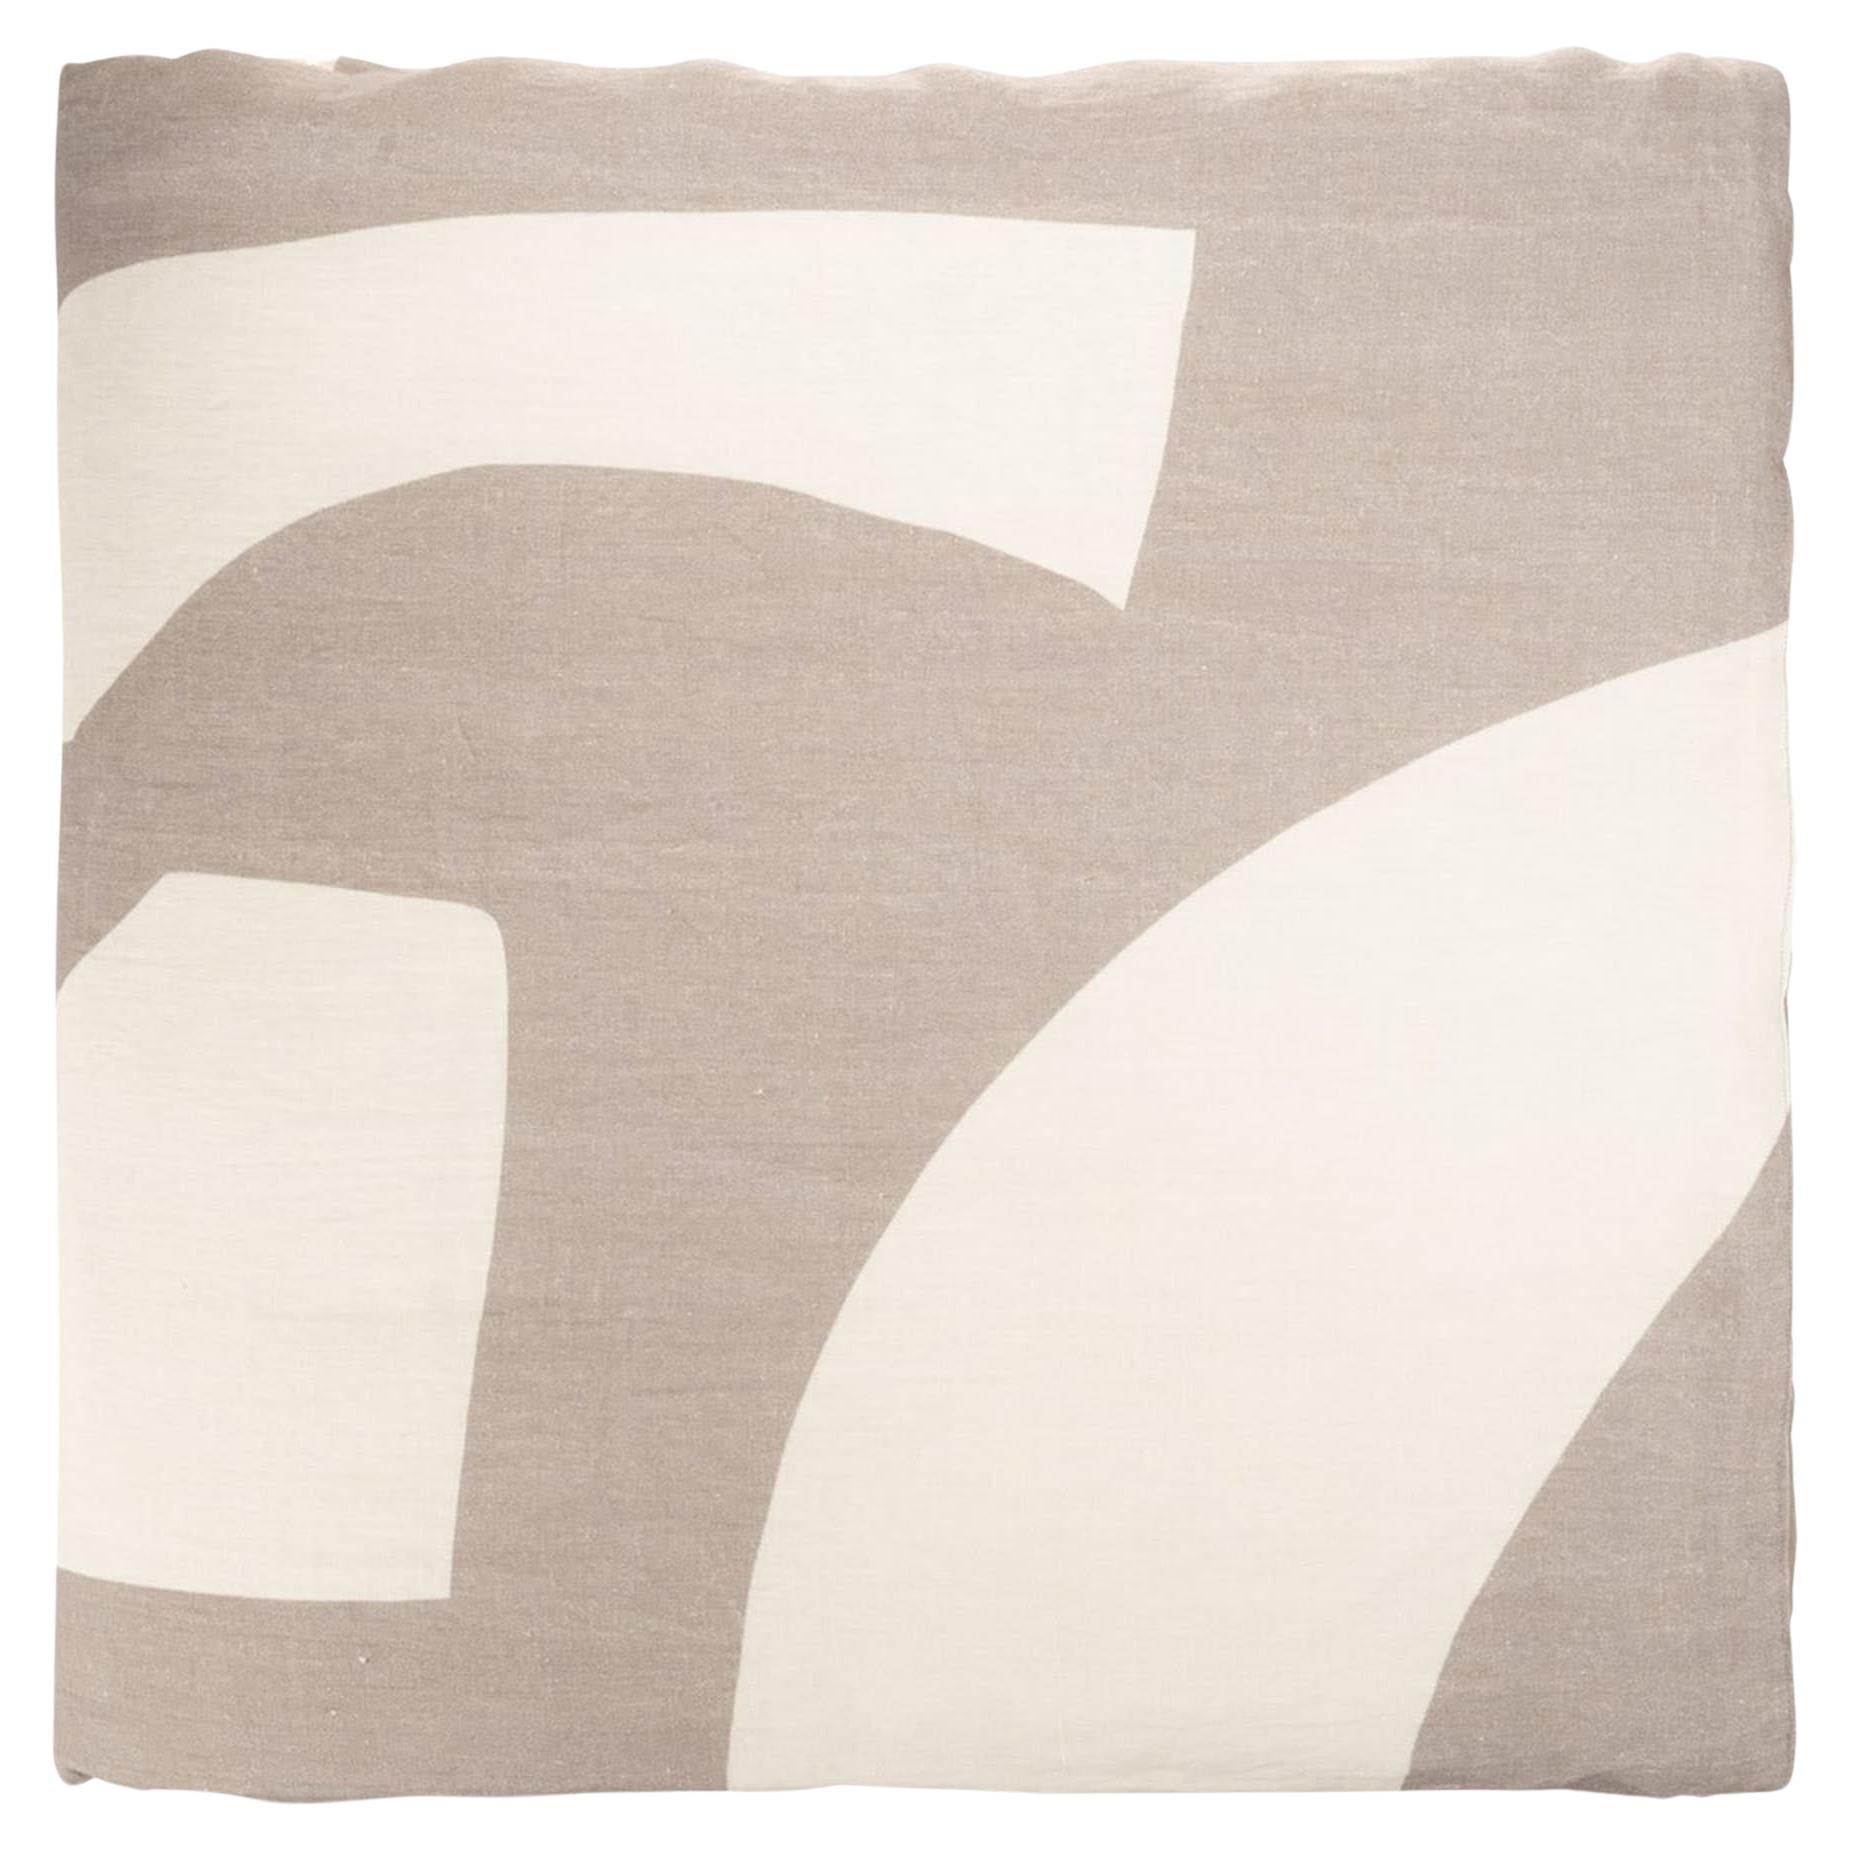 Sibylle#4 Beige/Cream Printed Throw by Studiopepe For Sale